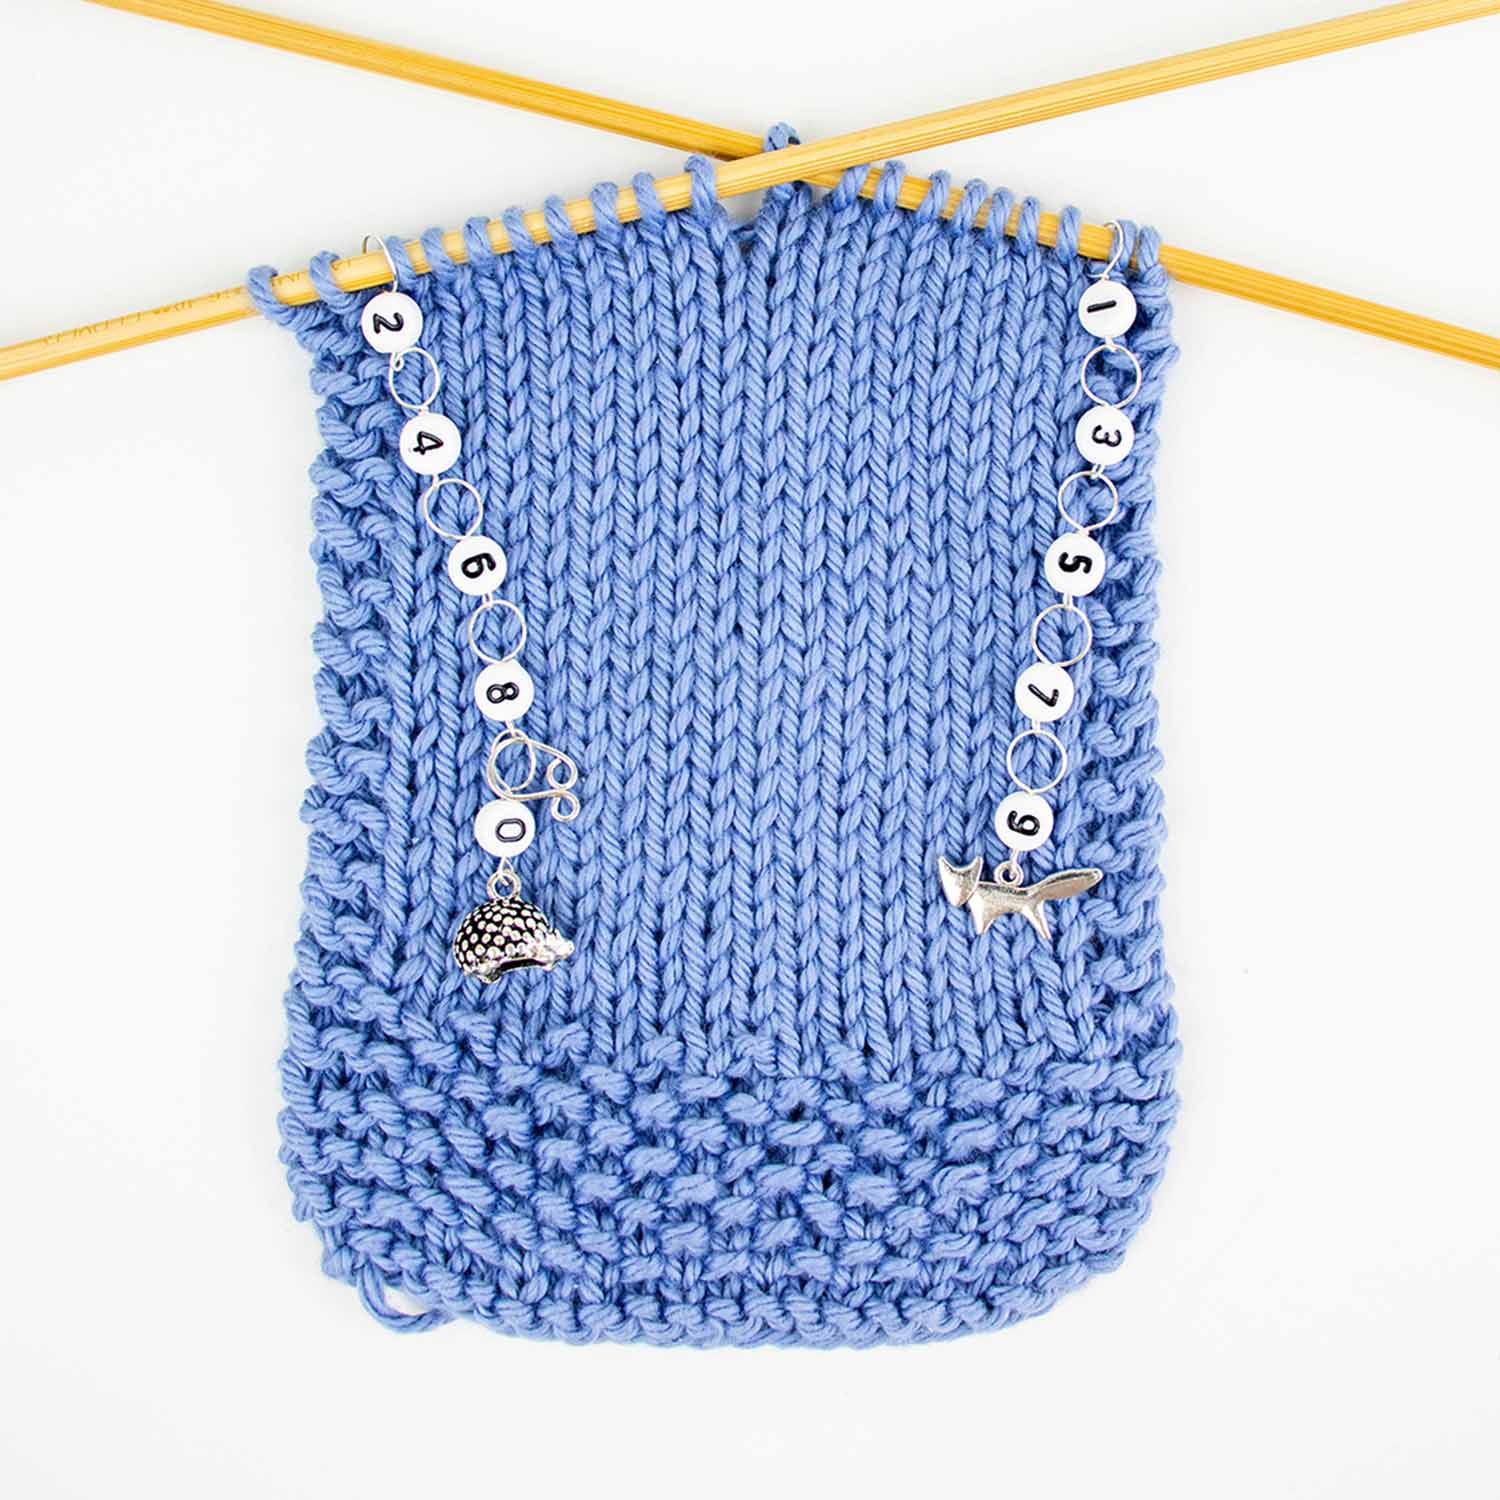 Knitting Row Counters Guide 